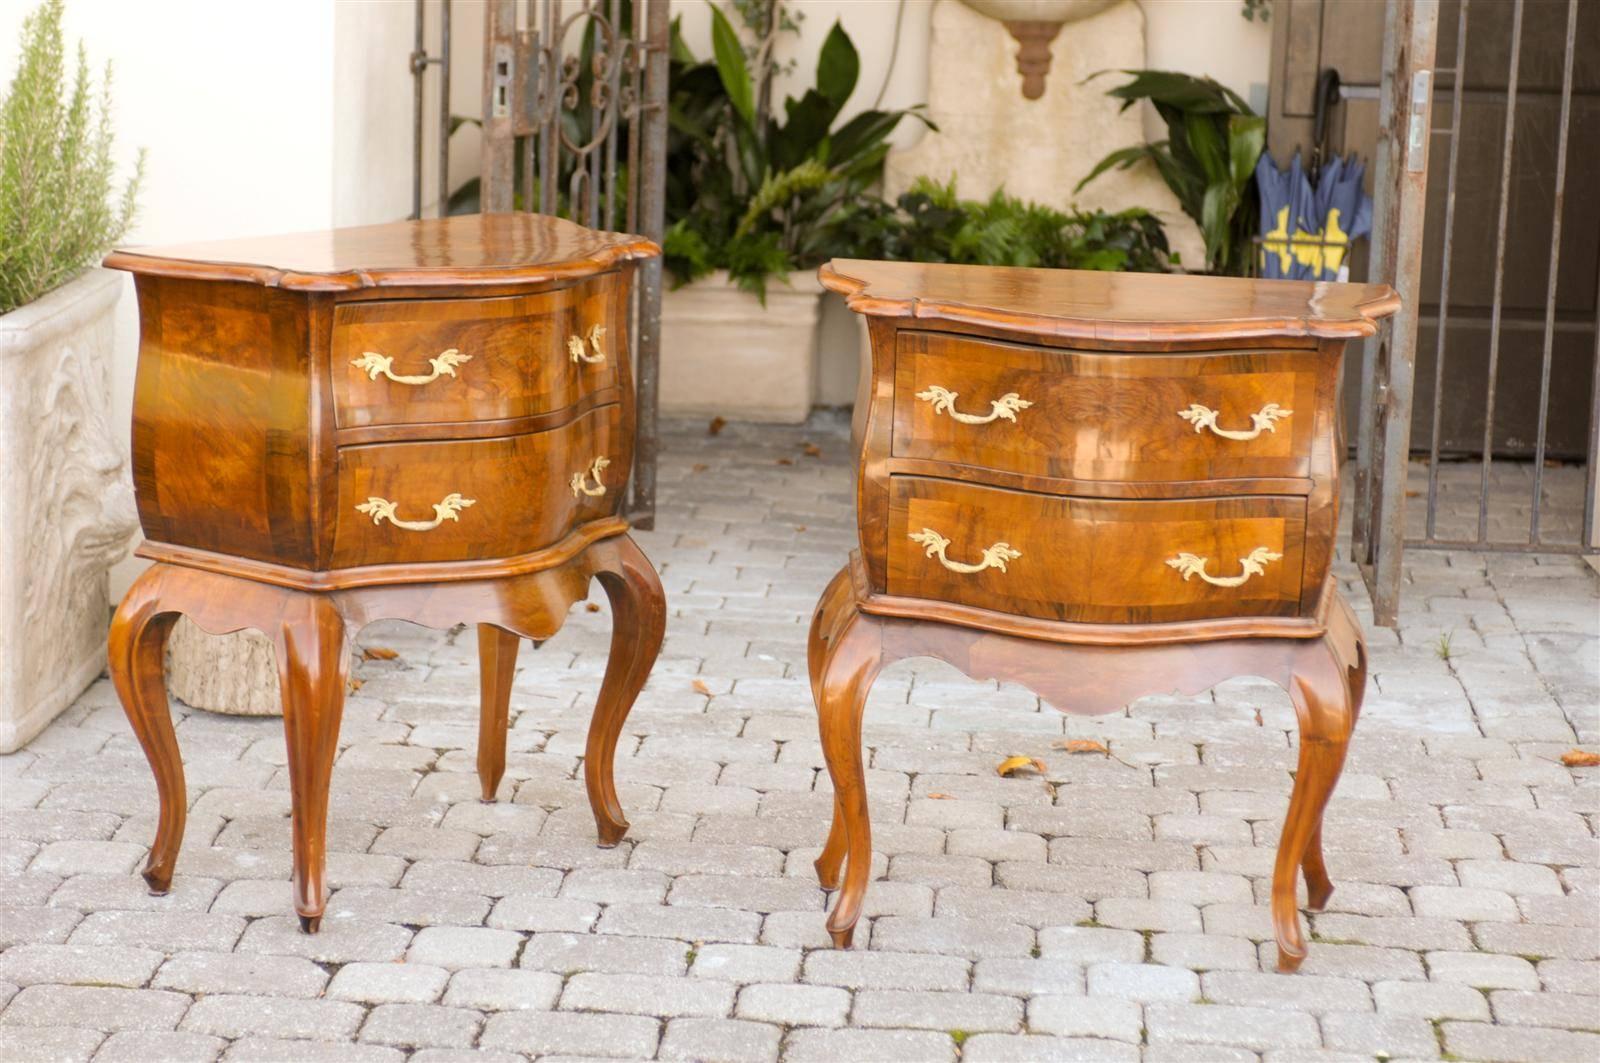 This pair of Italian Louis XV style walnut petite bombé commodes features for each piece a molded, shaped top over two serpentine drawers with slightly bowed sides. Two baroque style brass pulls adorn each drawer, nicely standing out against the